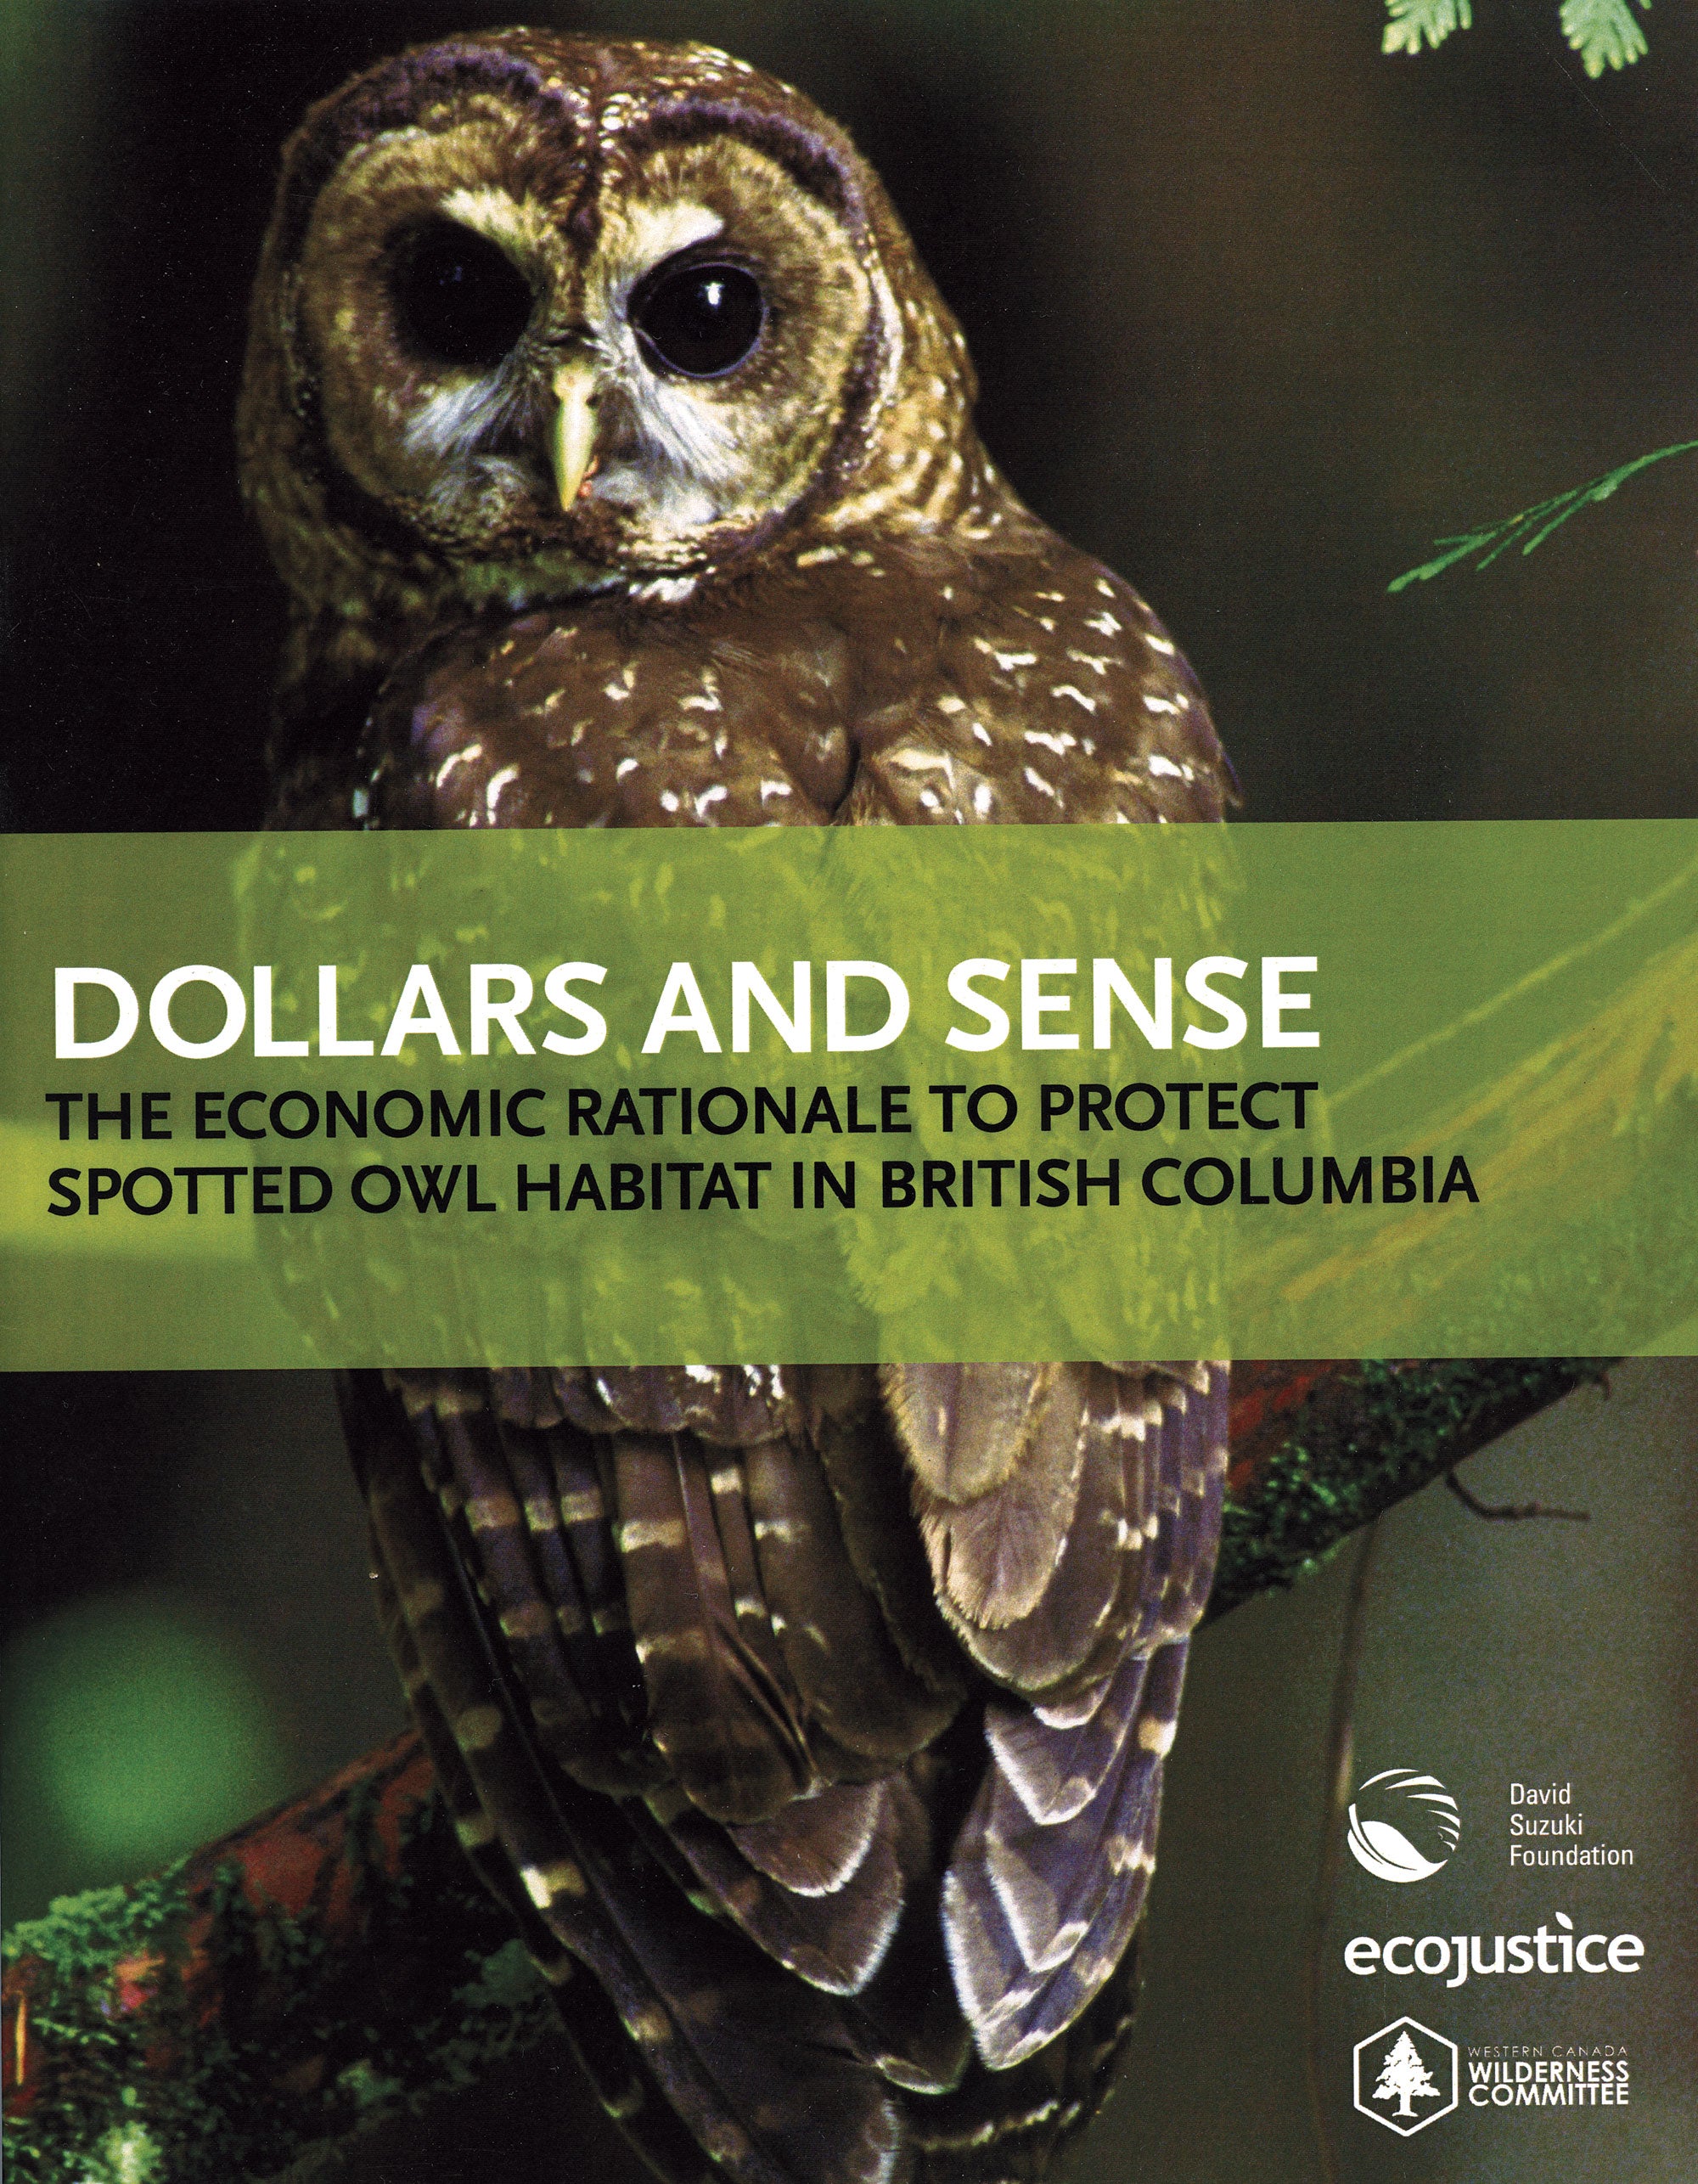 A book cover with a photo of an owl. Text over the cover says "Dollars and Sense. The economic rationale to protect owl habitat in British Columbia." There are logos of the David Suzuki Foundation, ecojustice and Wilderness Committee on the right. End of image description.